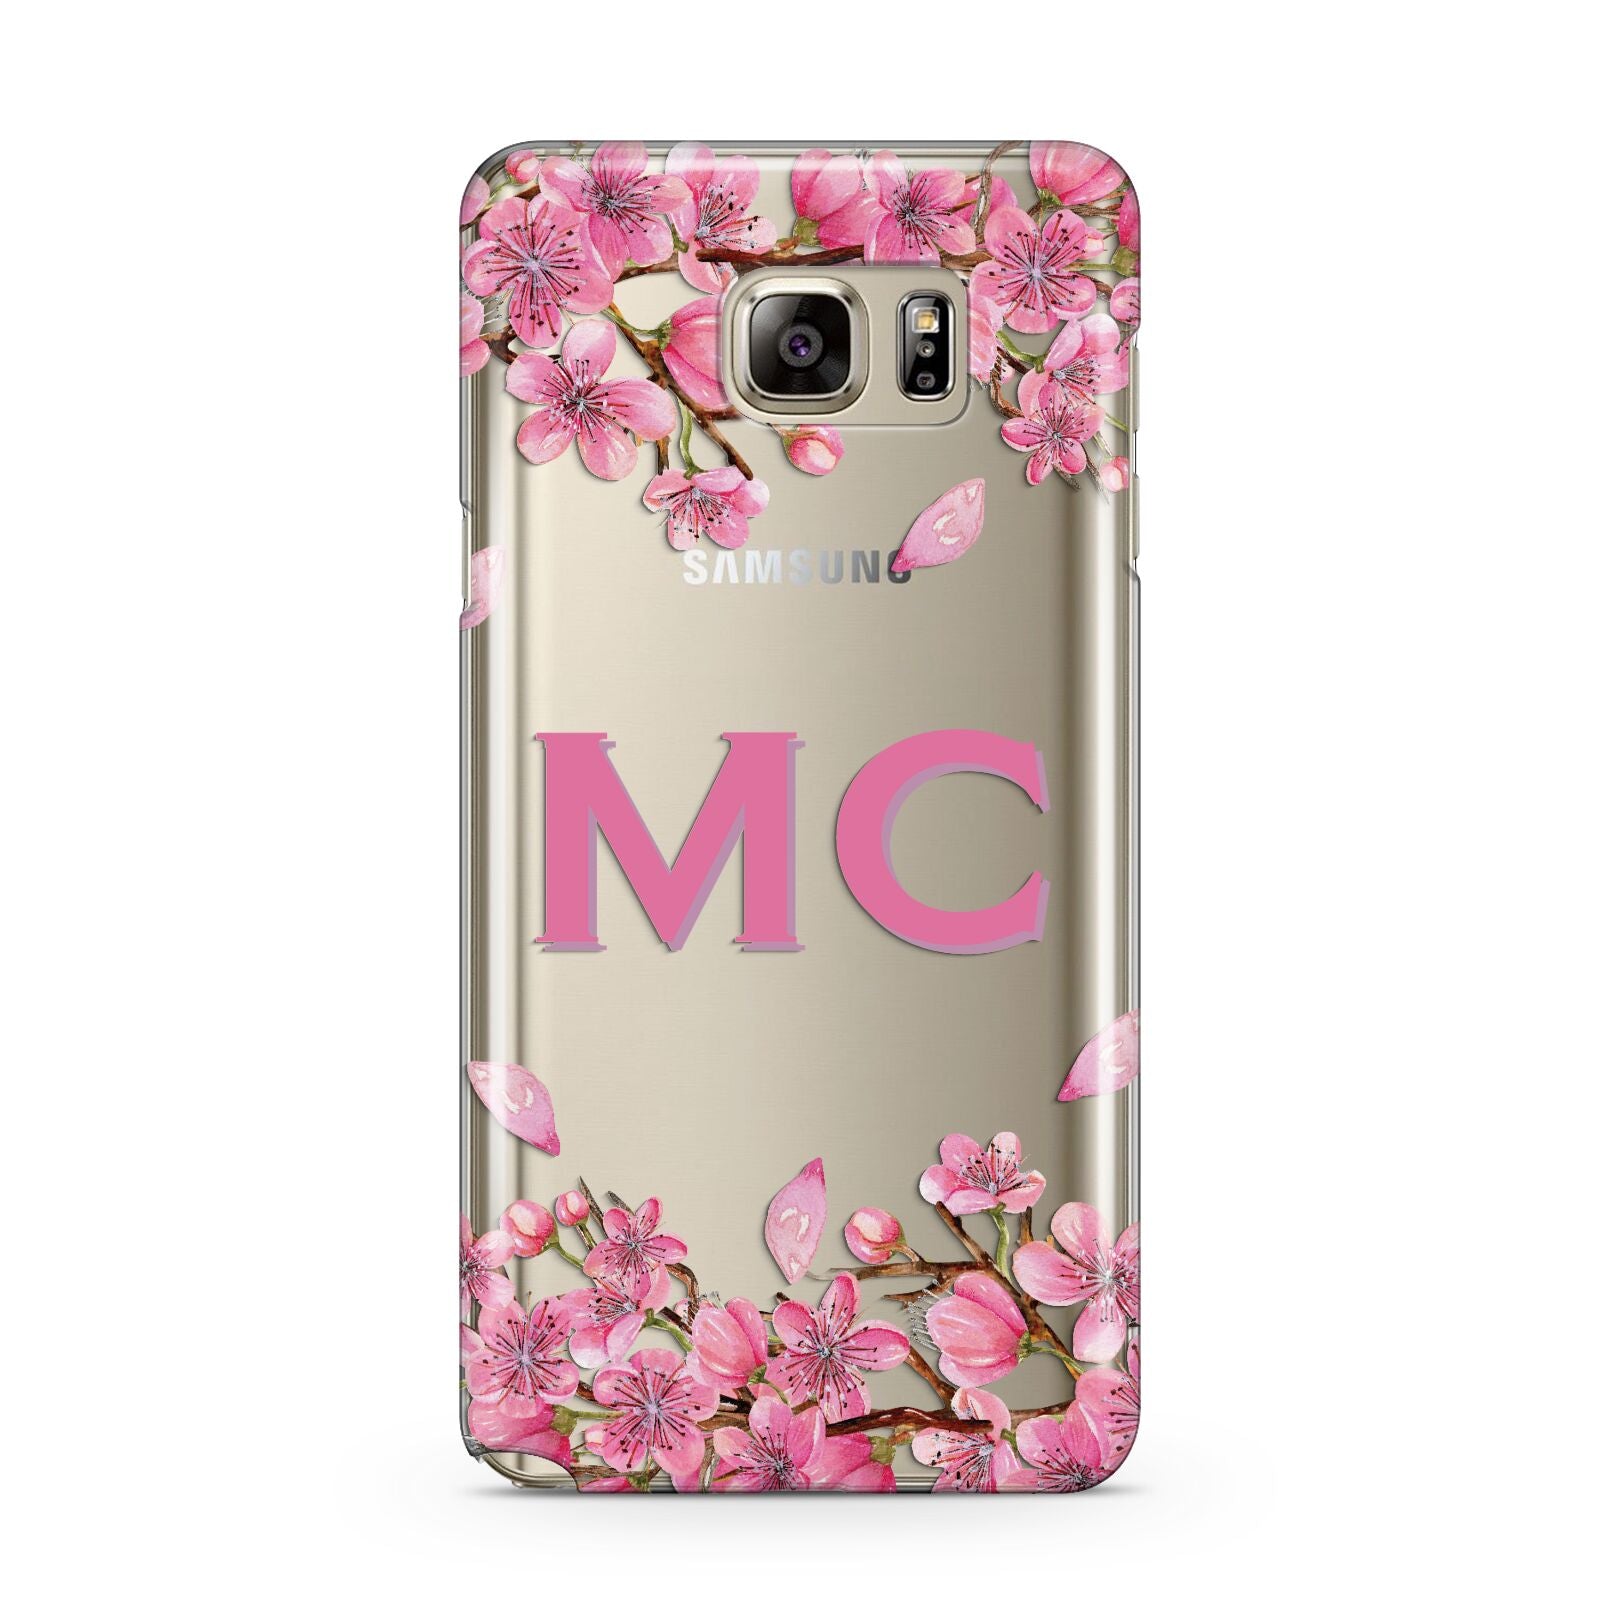 Personalised Vibrant Cherry Blossom Pink Samsung Galaxy Note 5 Case